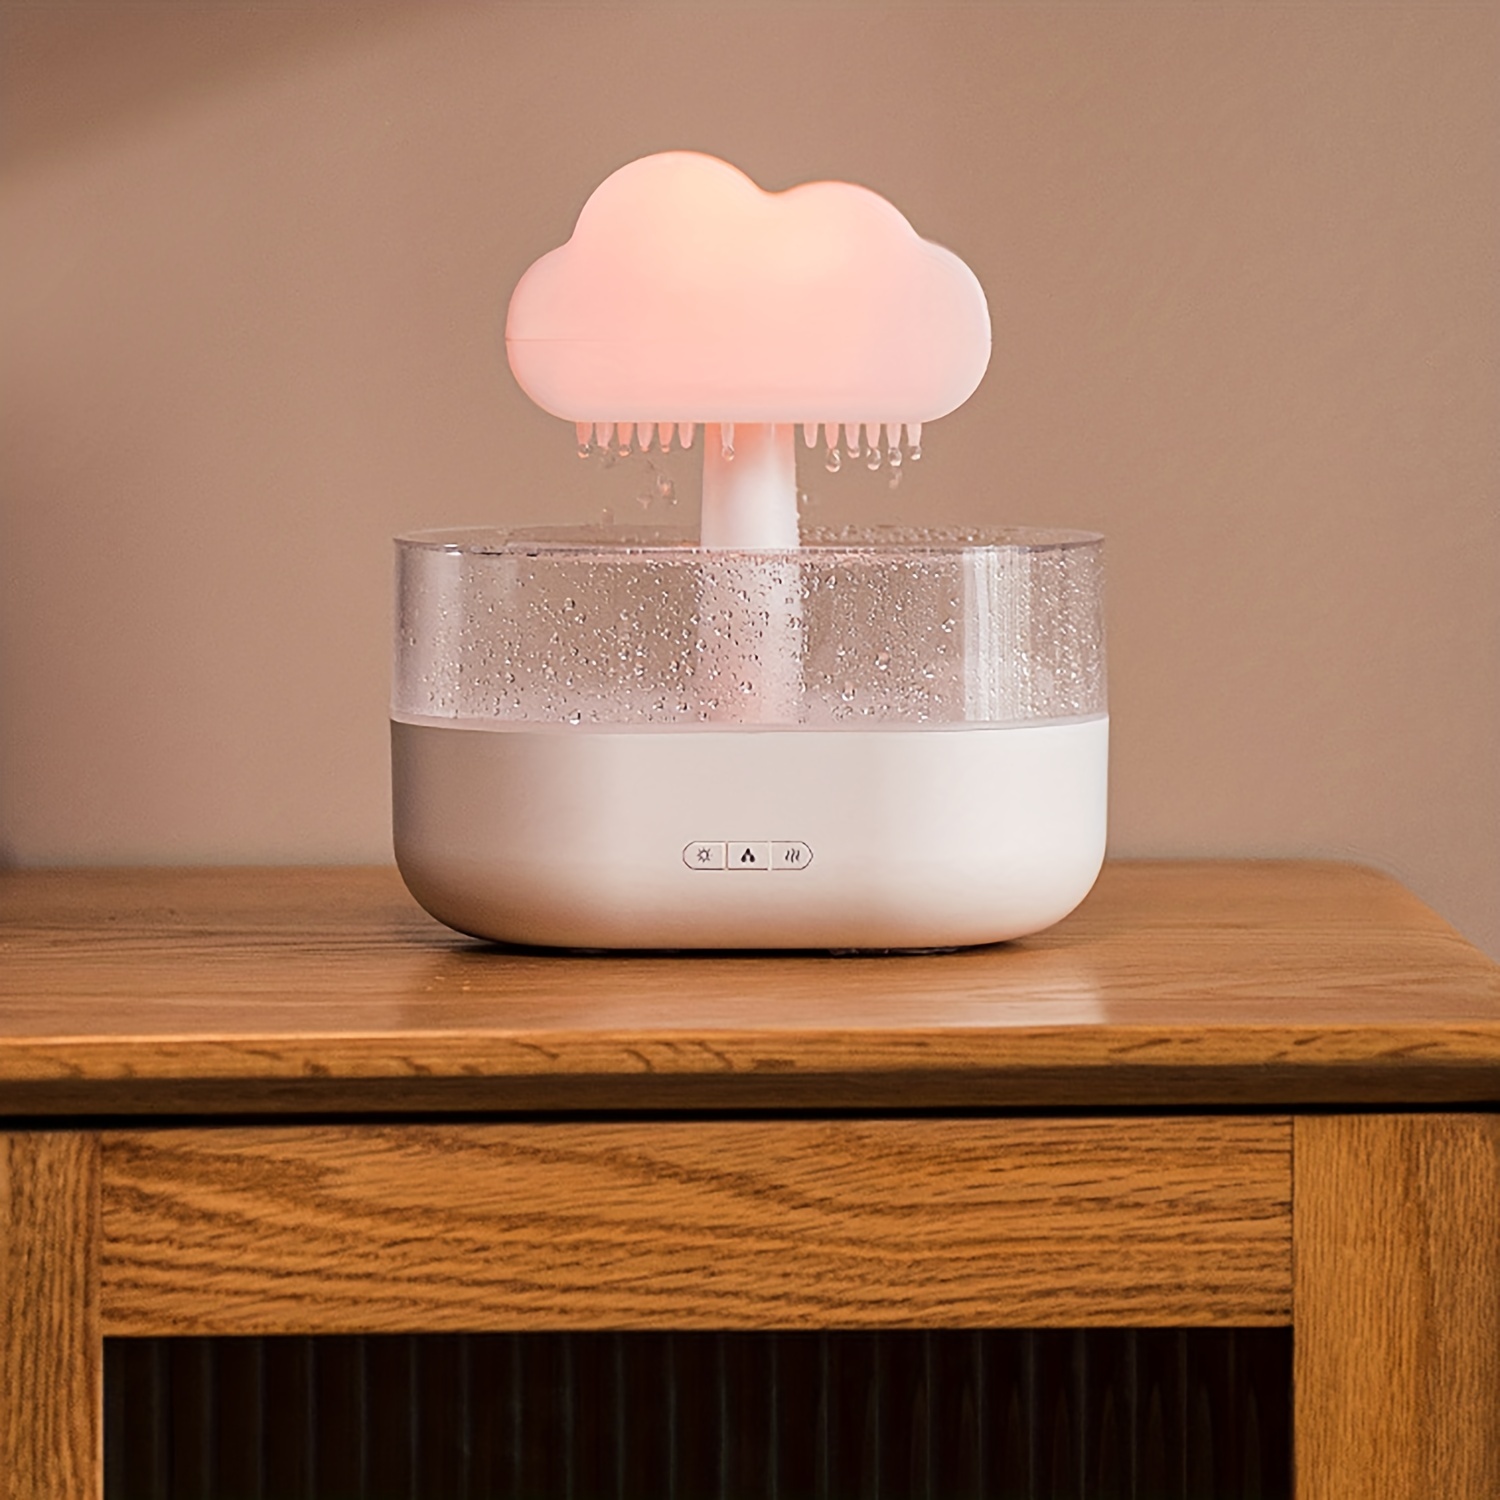 Rain Cloud Humidifier Water Drip with Adjustable LED Lights White Noise  Humidification Desk Fountain Bedside Sleeping Relaxing Mood (White)